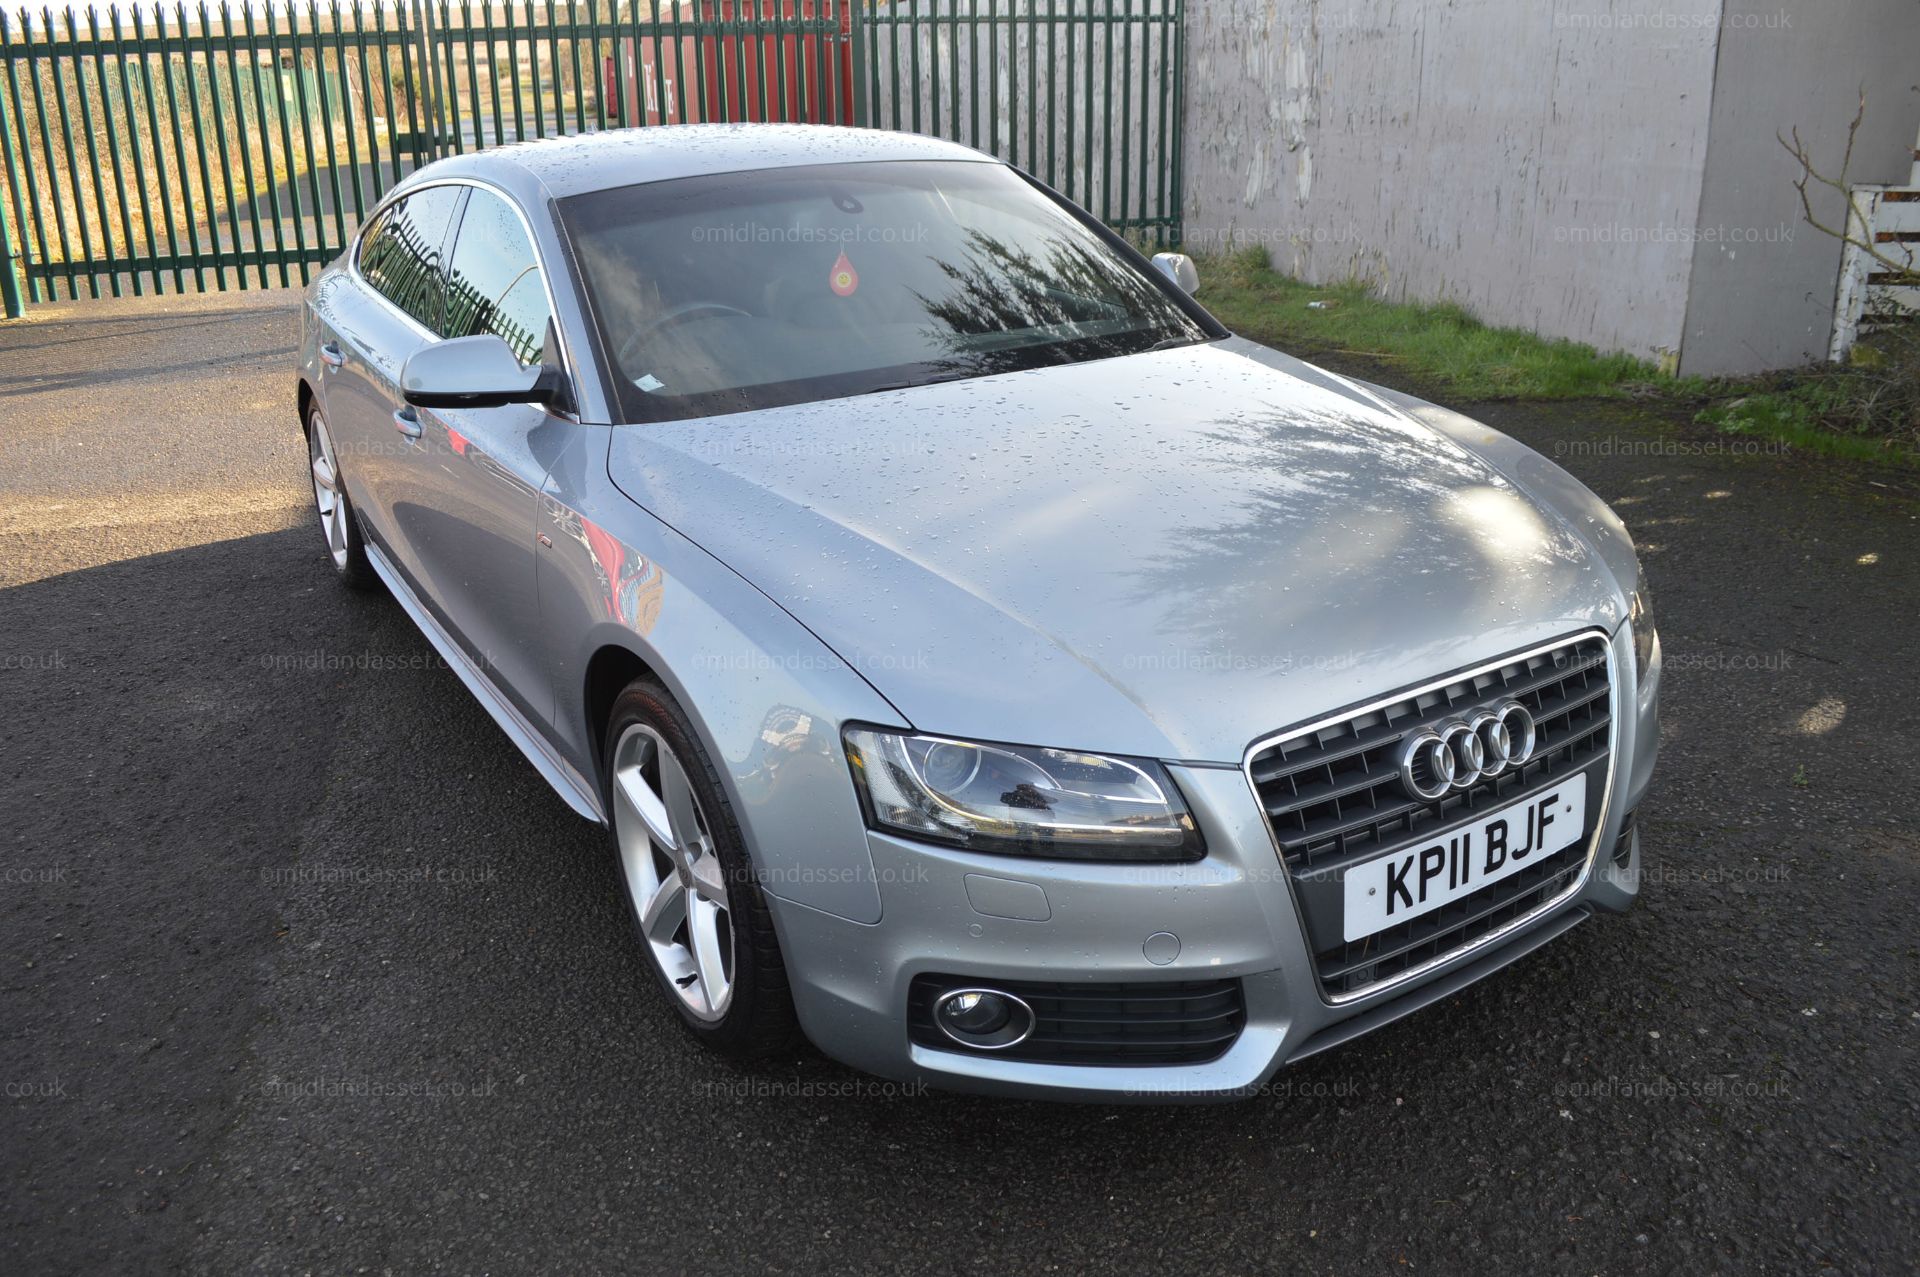 NR - 2011/11 REG AUDI A5 S LINE TDI, SERVICE HISTORY, 2 FORMER KEEPERS